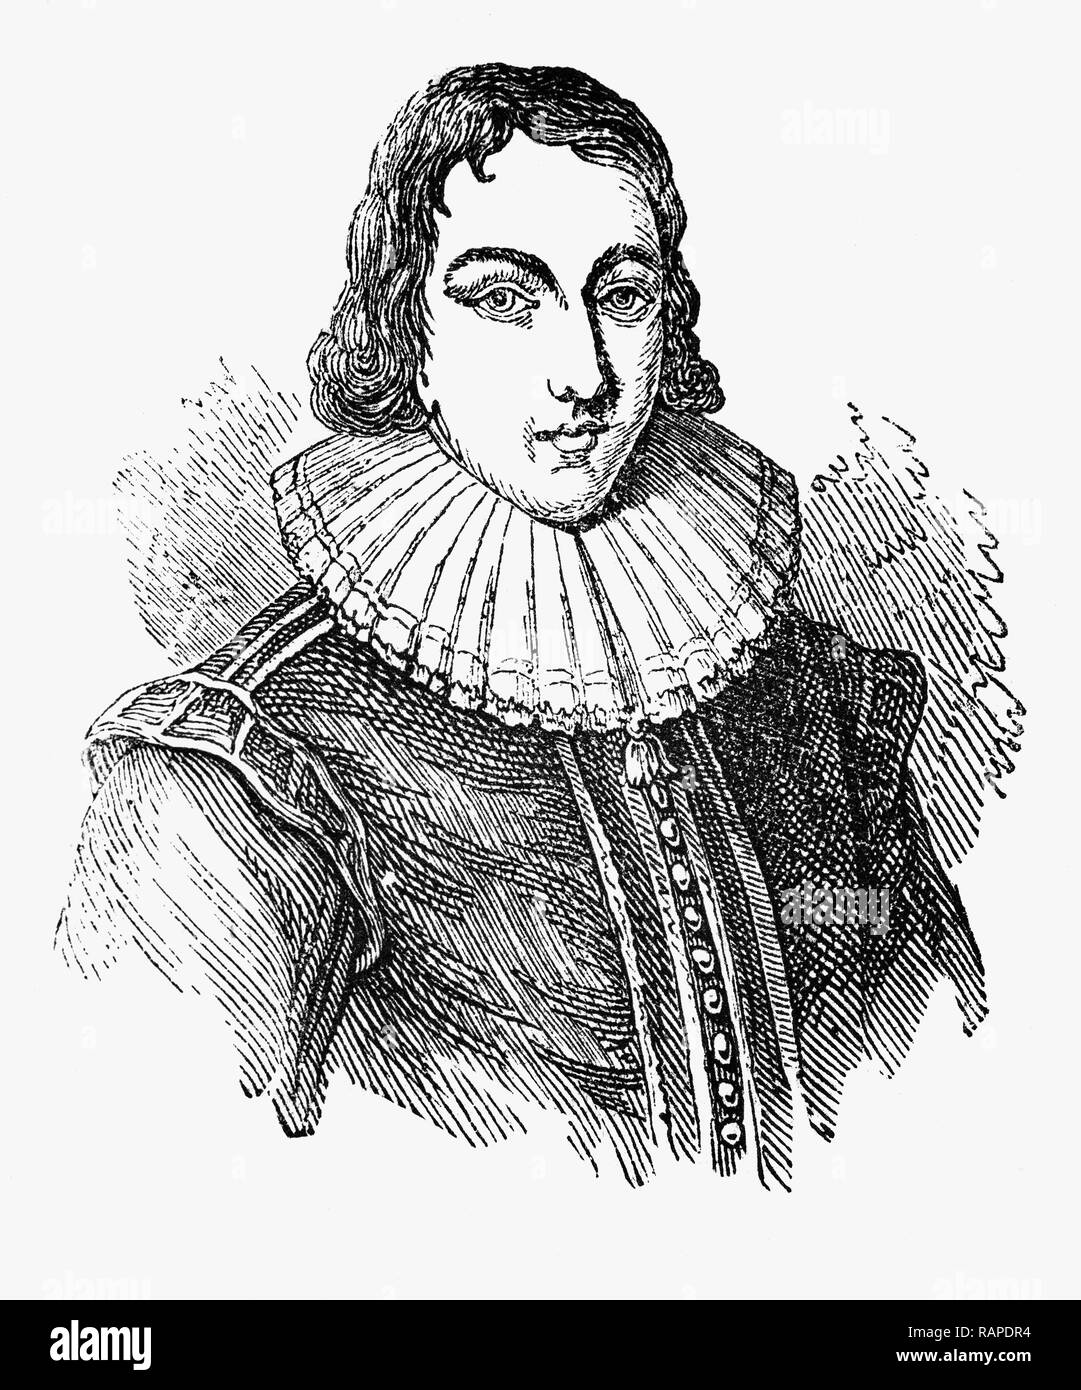 John Milton (1608-1674), aged 19, became an English poet, polemicist, man of letters, and civil servant for the Commonwealth of England under its Council of State and later under Oliver Cromwell. He wrote at a time of religious flux and political upheaval, and is best known for his epic poem Paradise Lost (1667), written in blank verse. Stock Photo